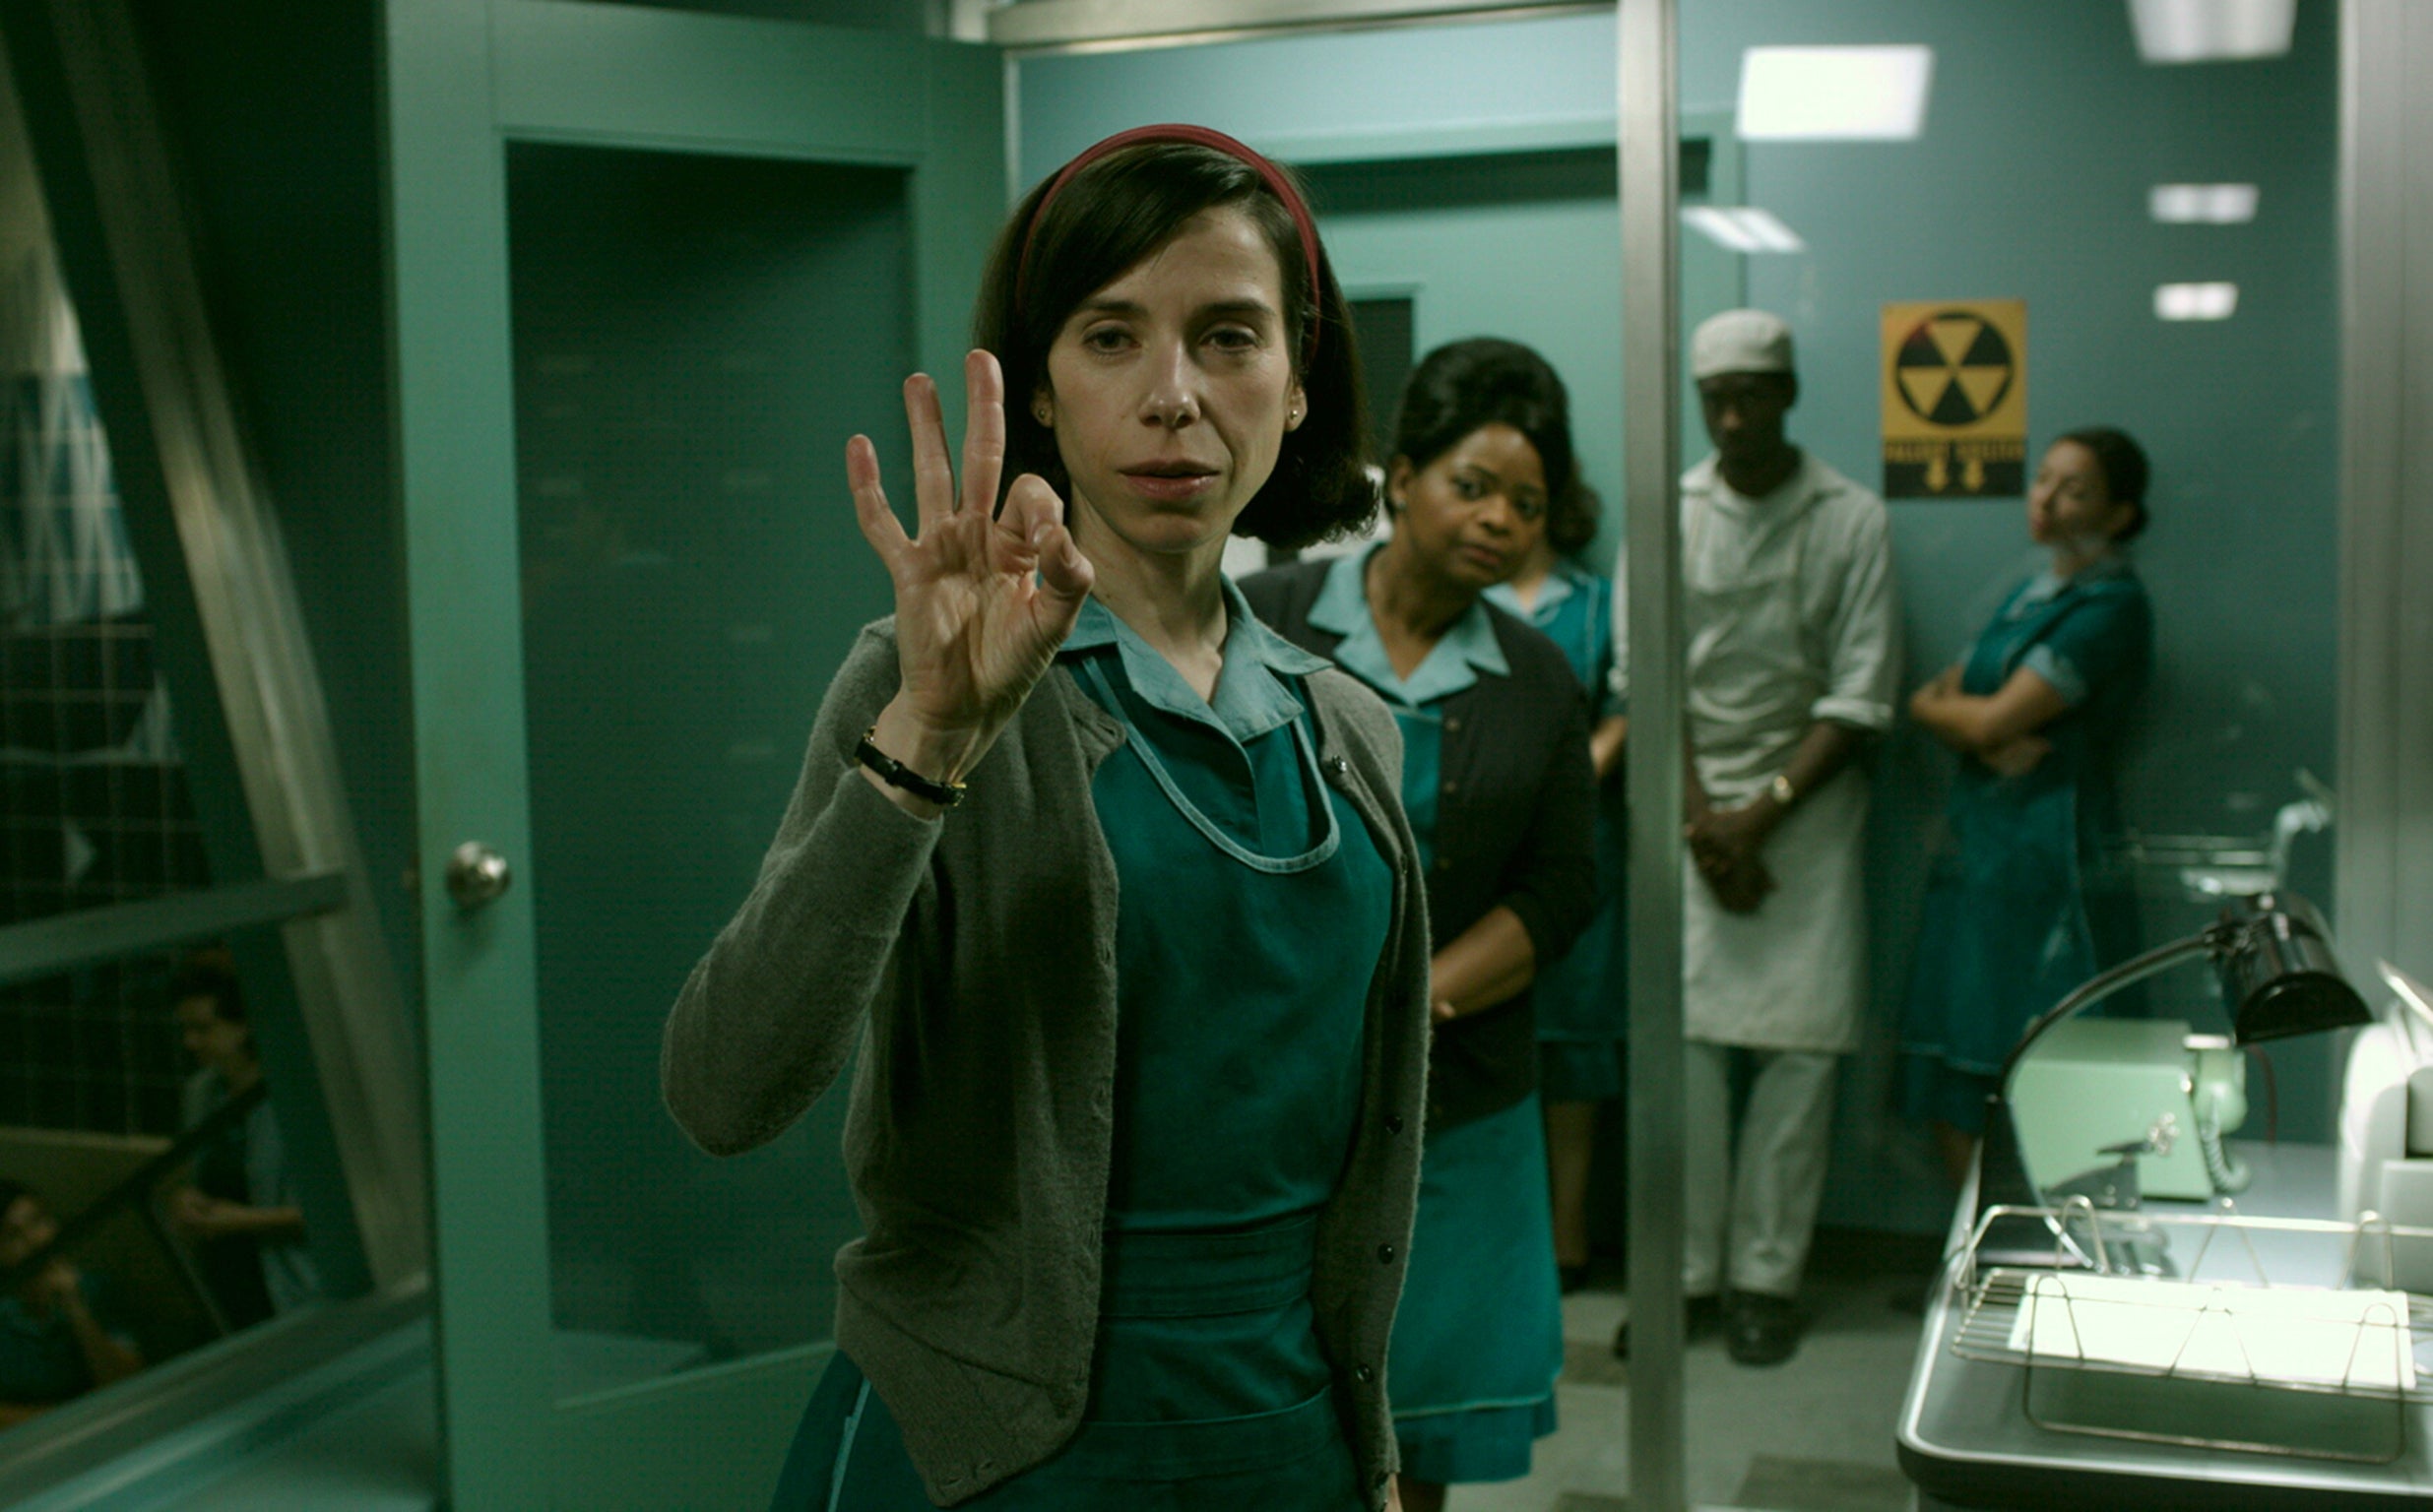 Sally Hawkins and Octavia Spencer in the film 'The Shape of Water'